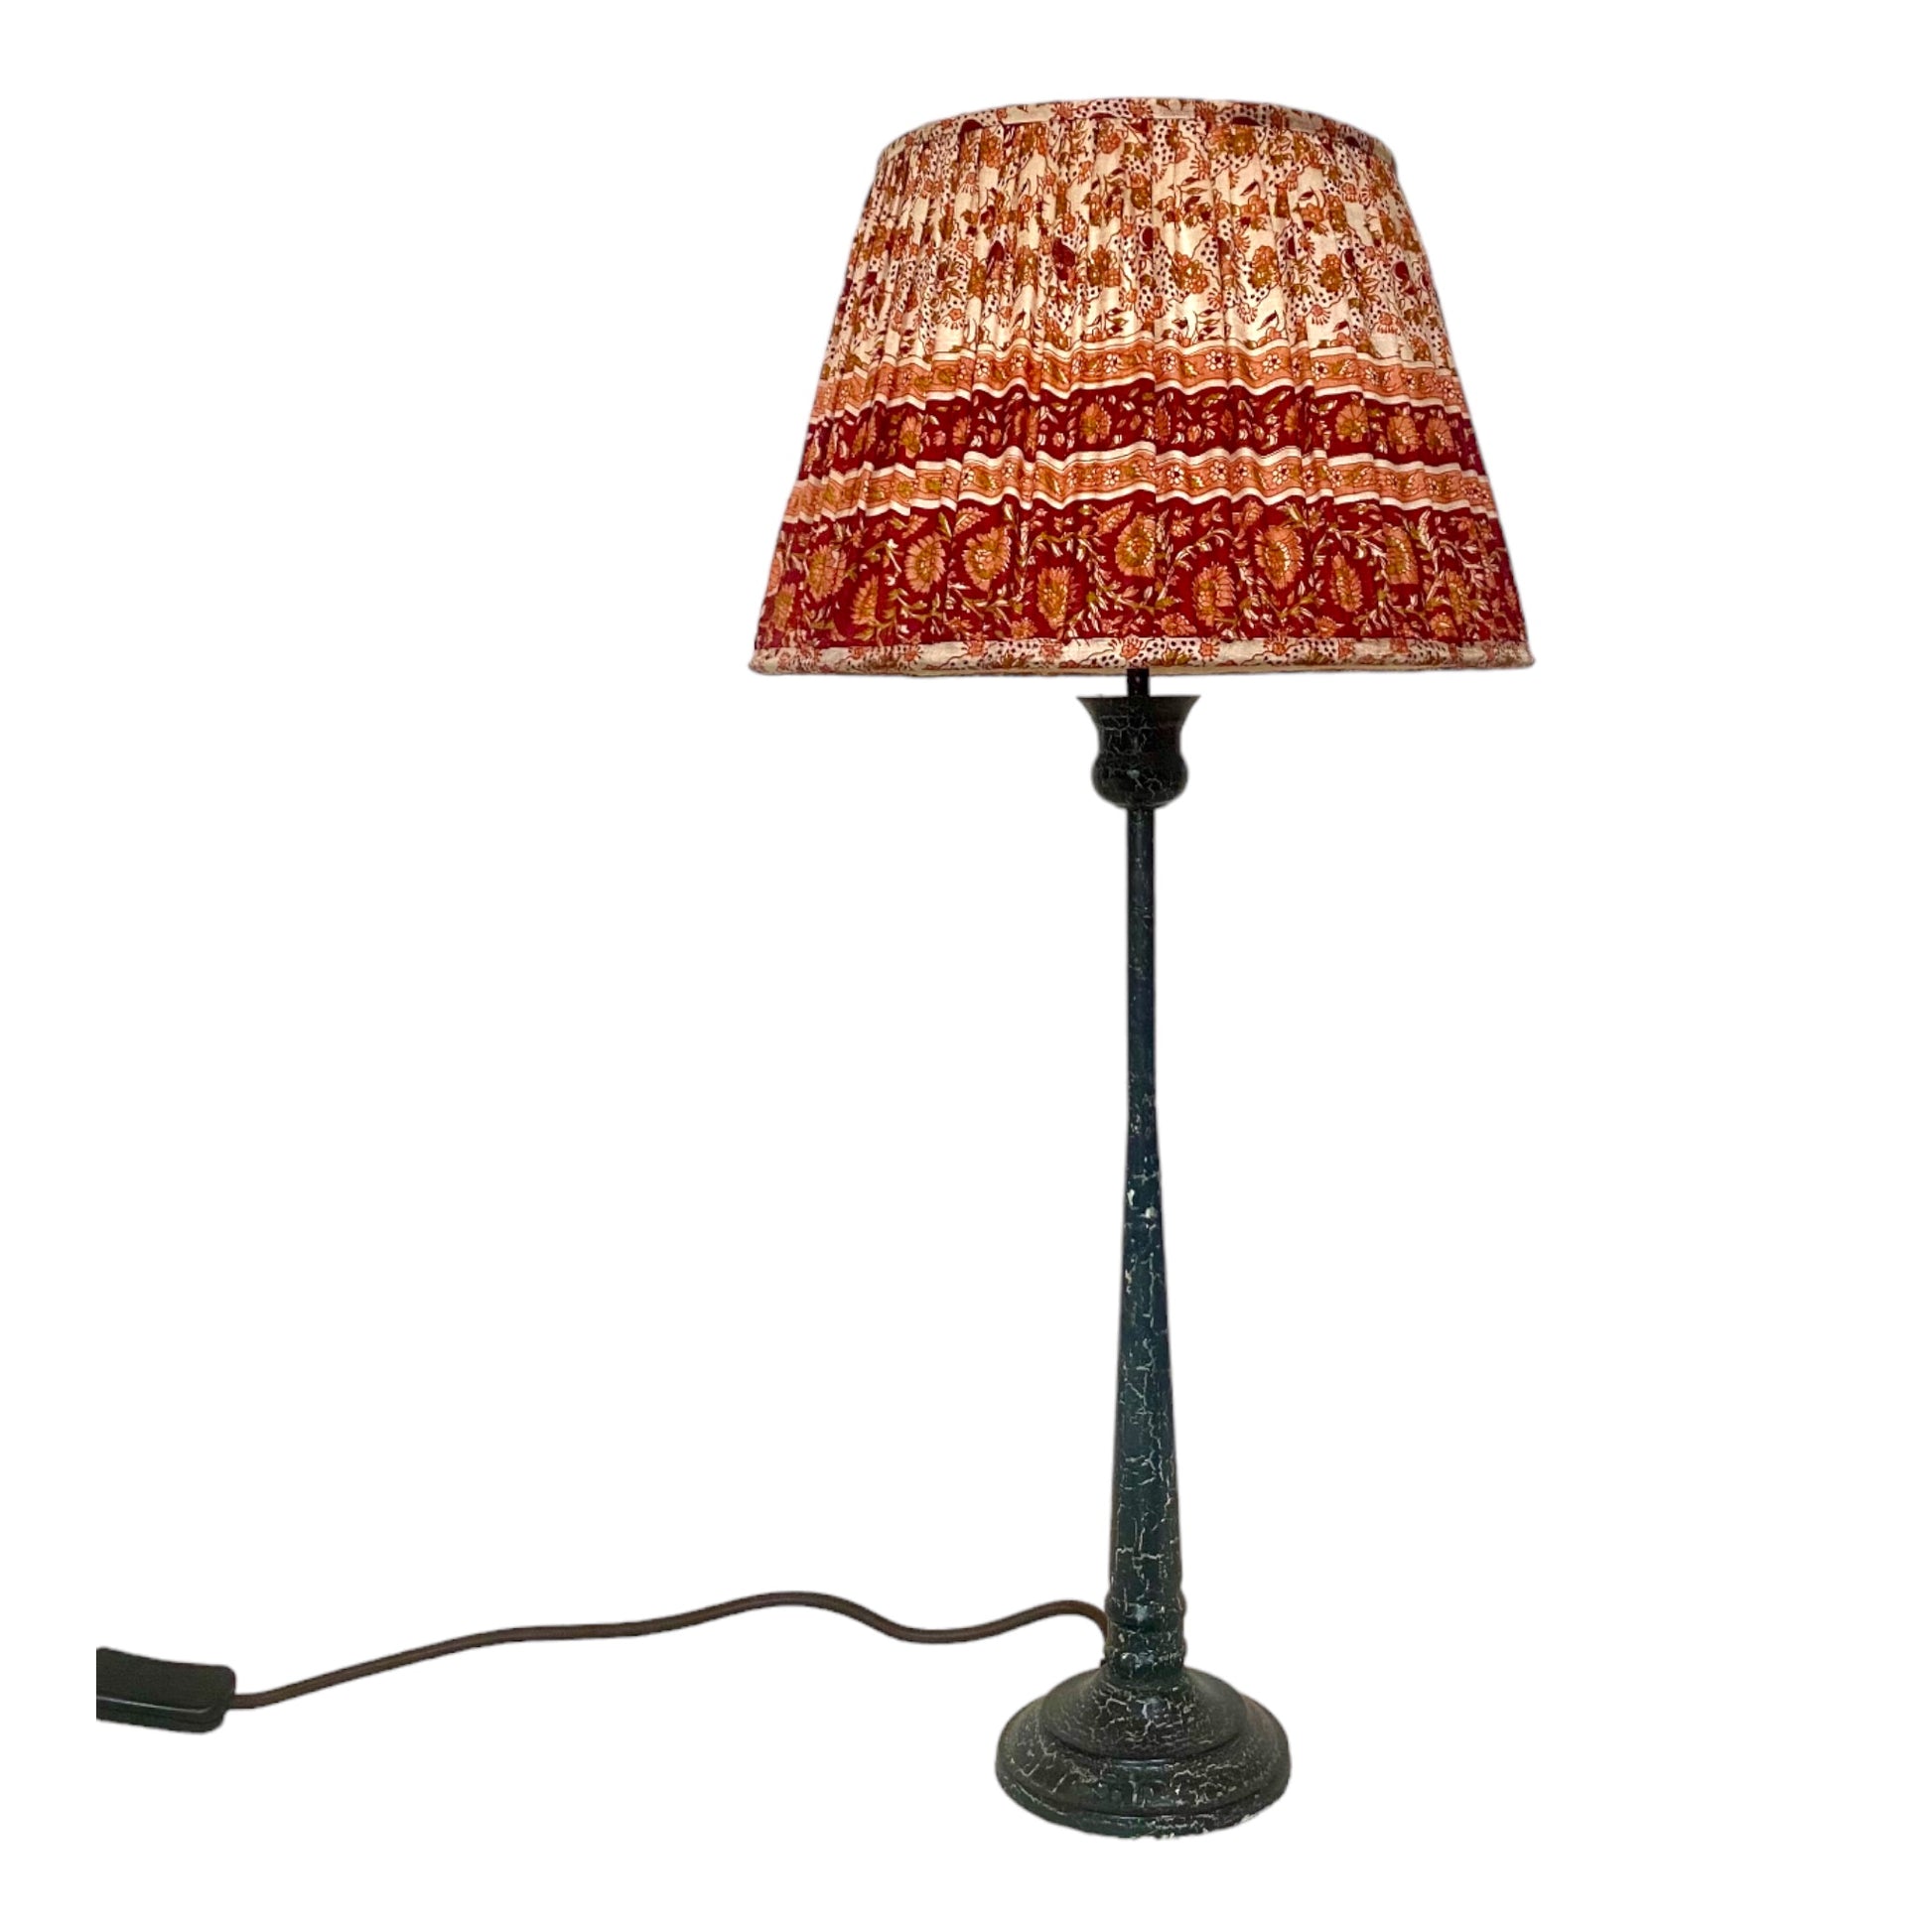 Pink and red vintage sari lampshade on candlestick